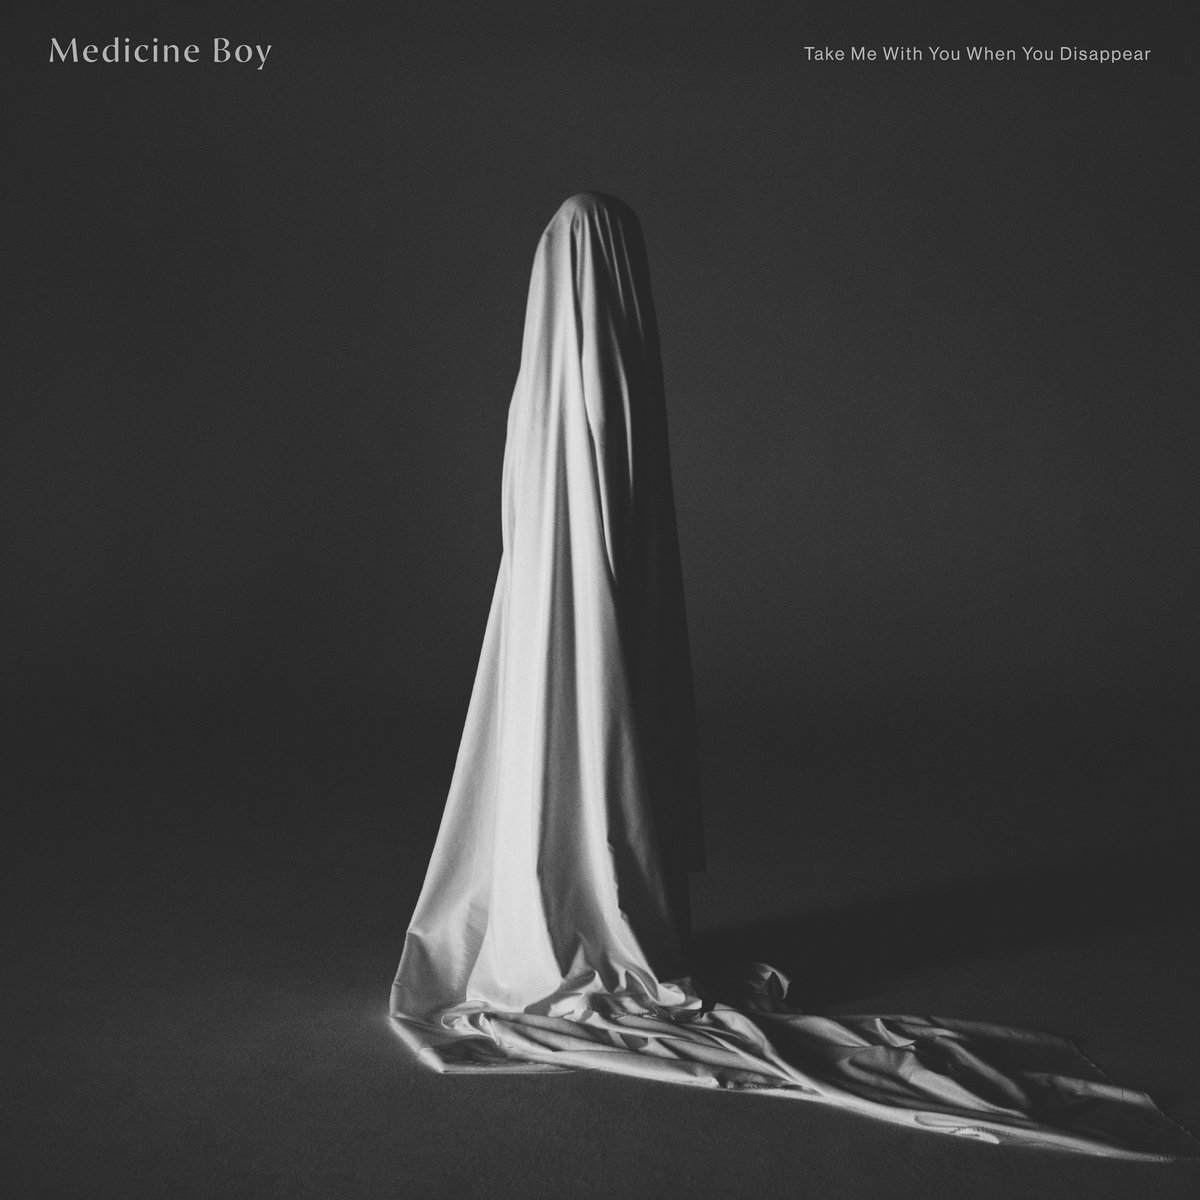 Medicine Boy - Take Me With You When You Disappear